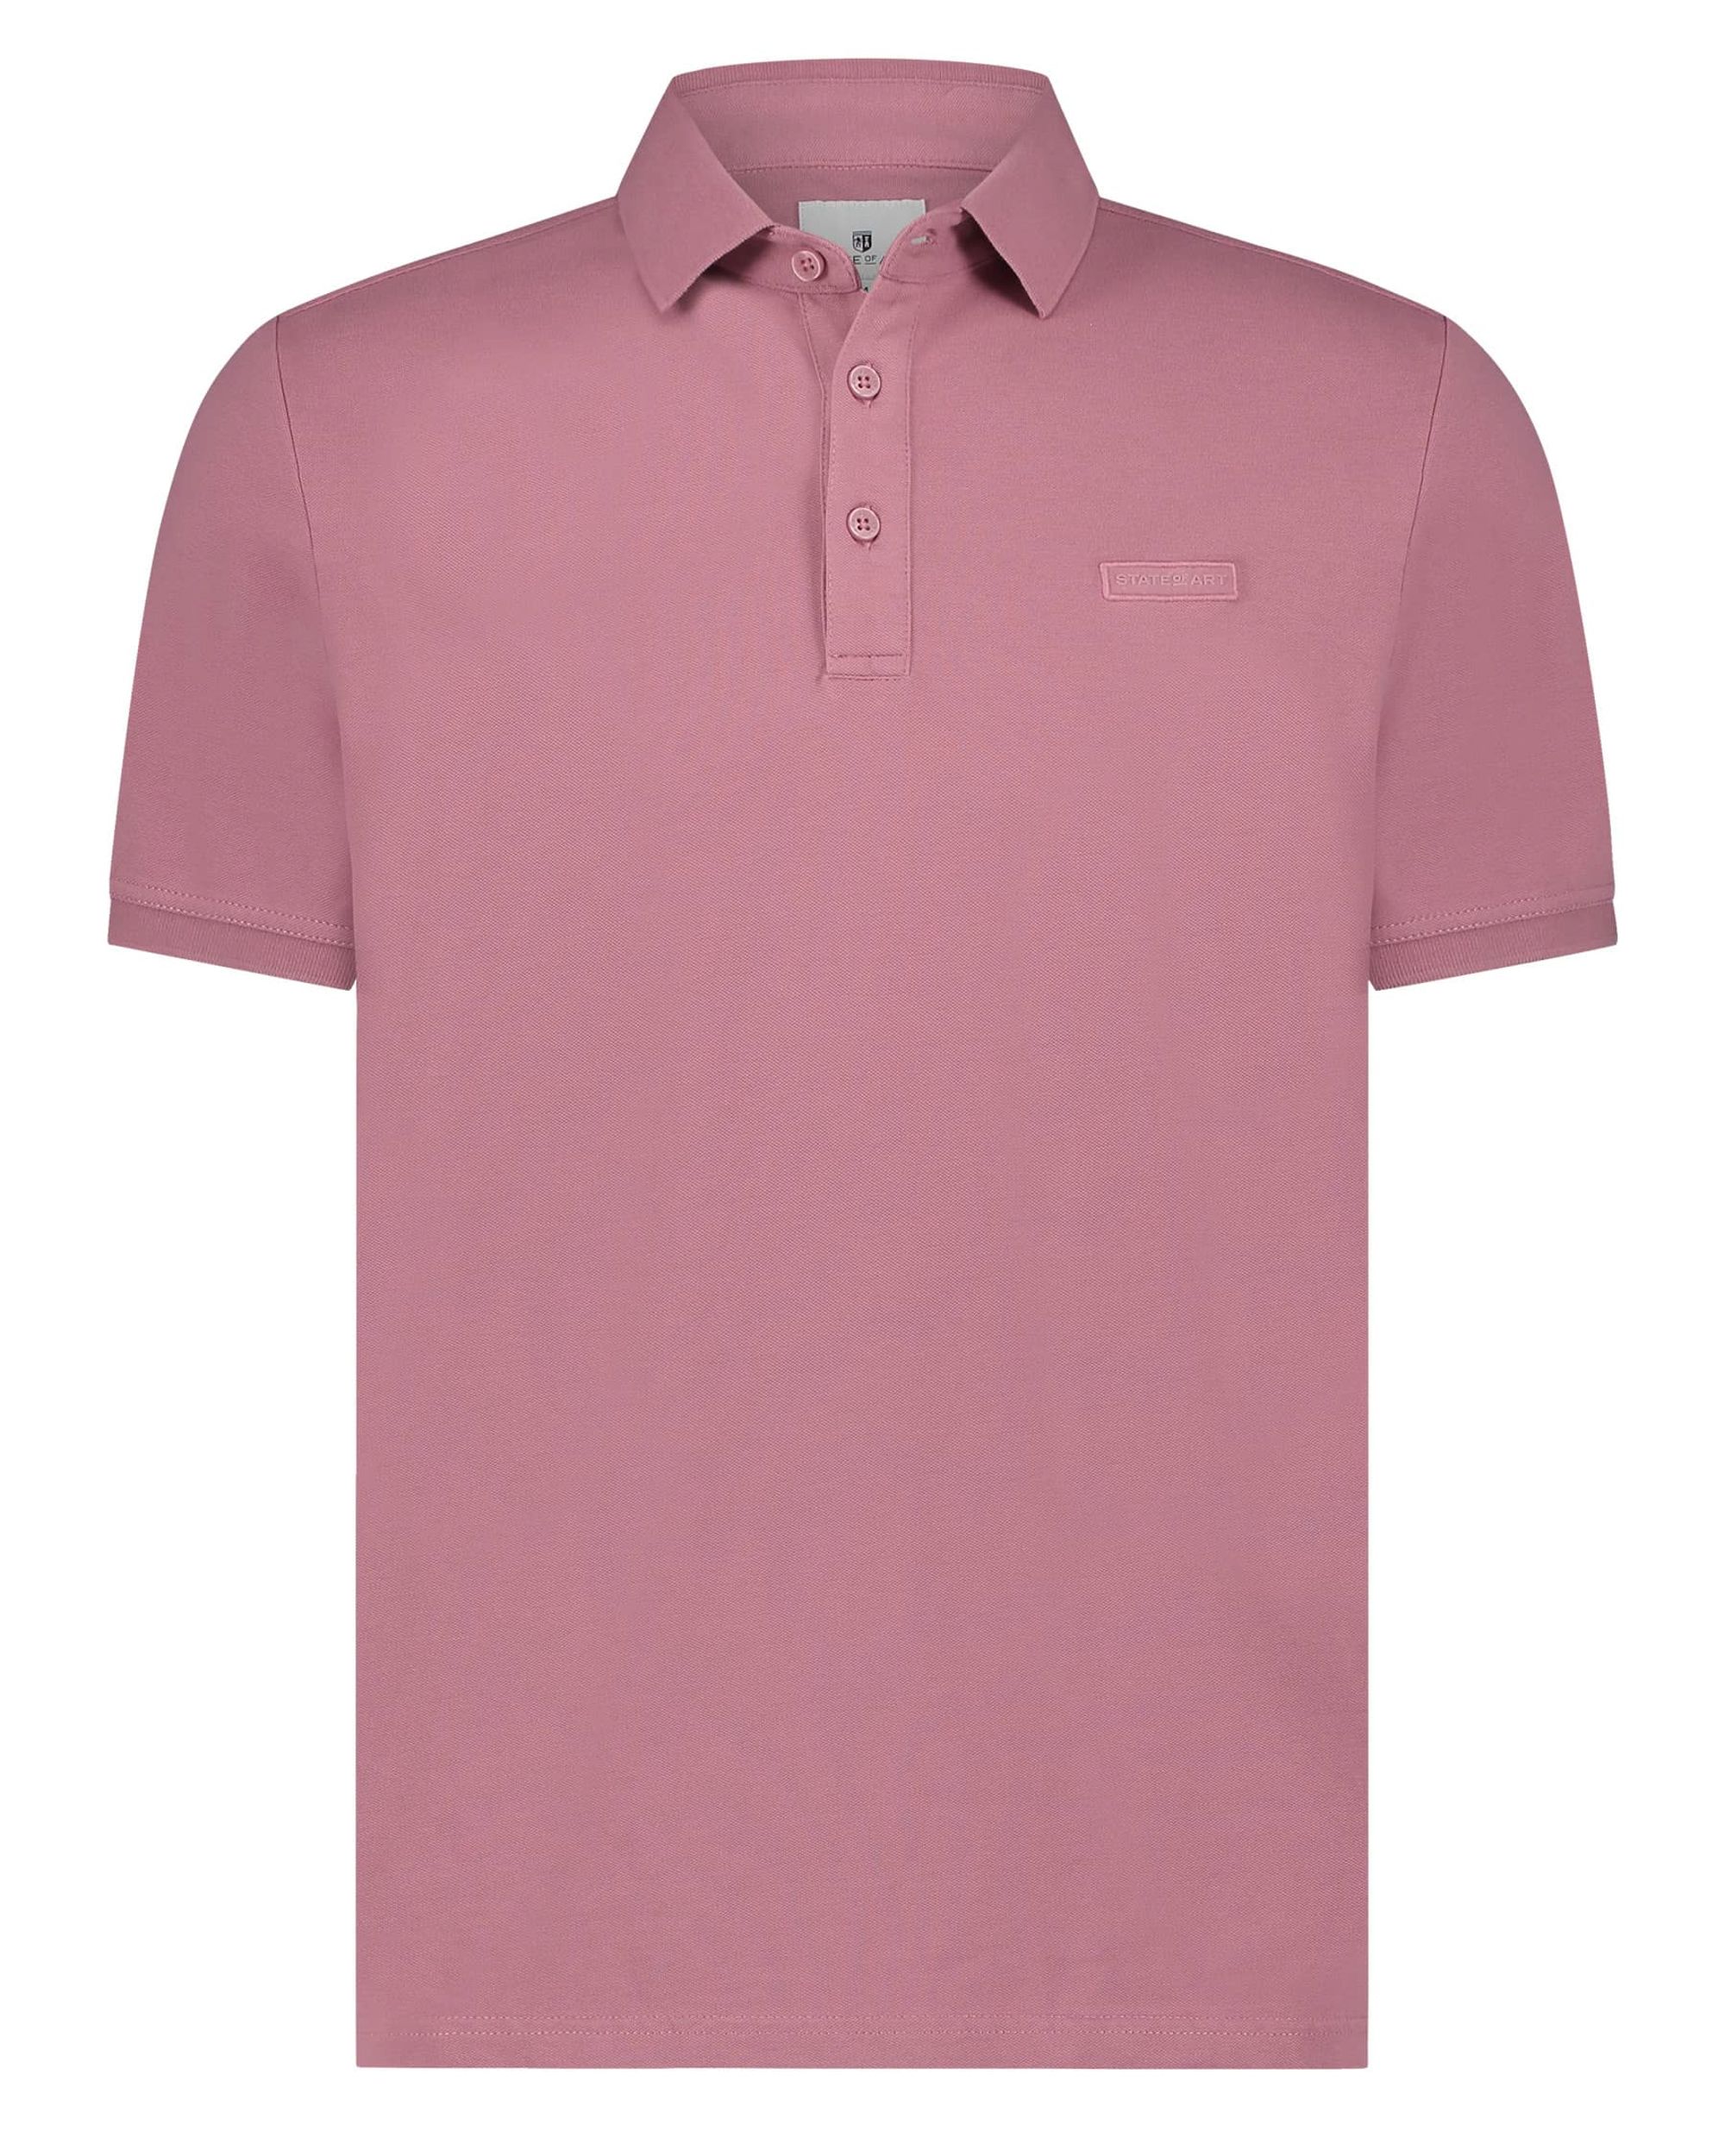 State of Art Polo KM Rood 093439-001-4XL